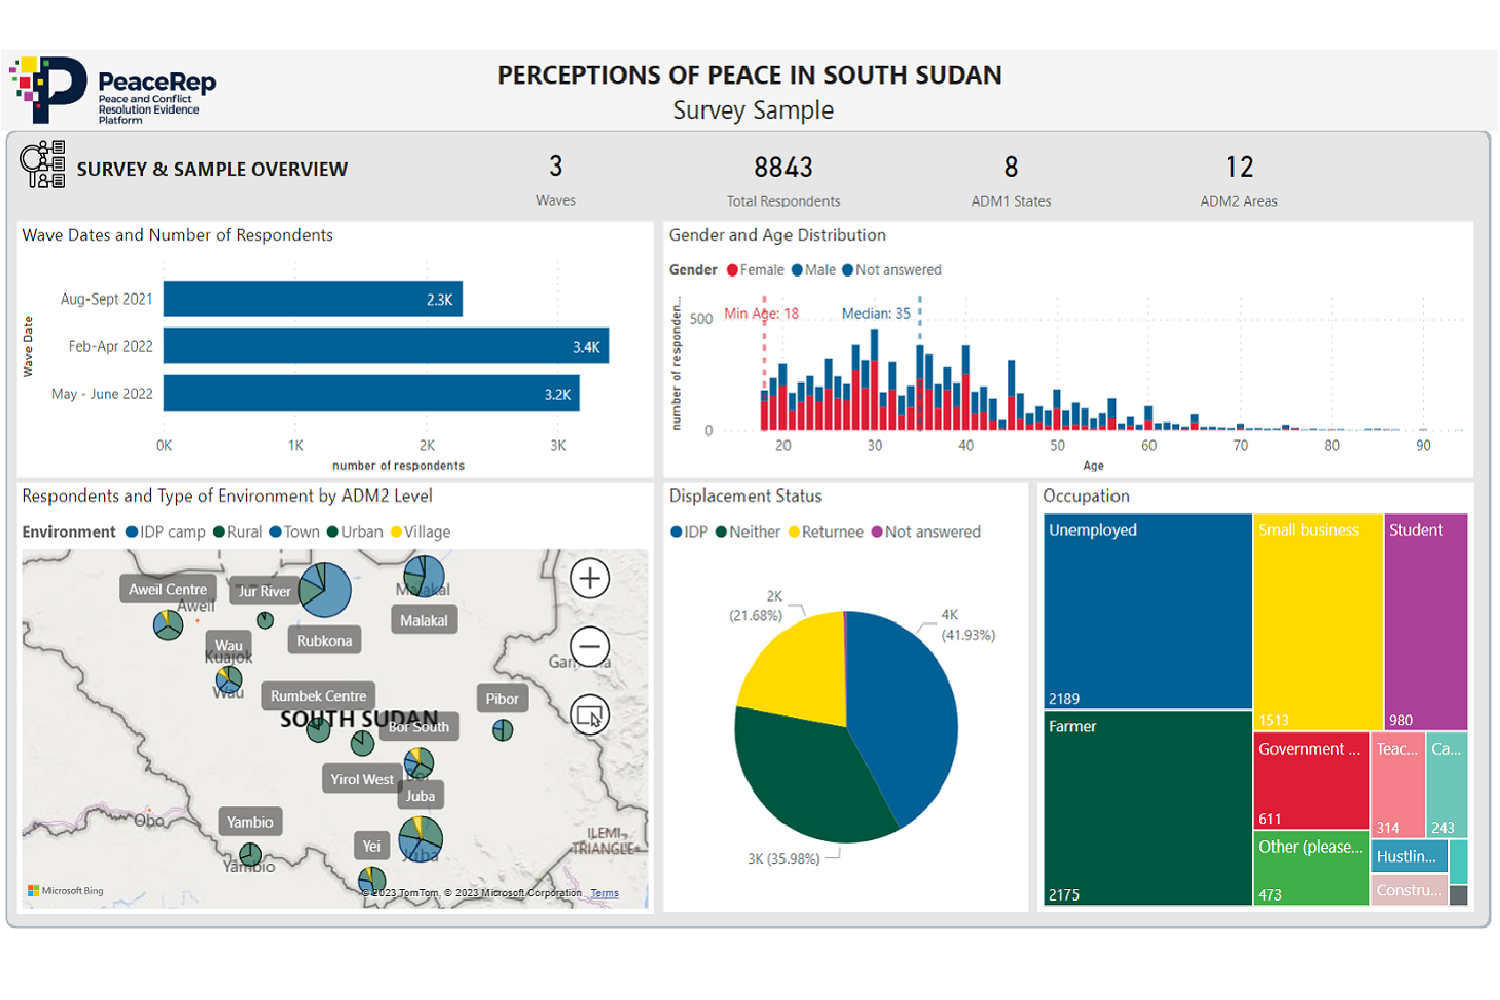 Preview of data visualisations presented via the South Sudan "perceptions of peace" dashboard tool